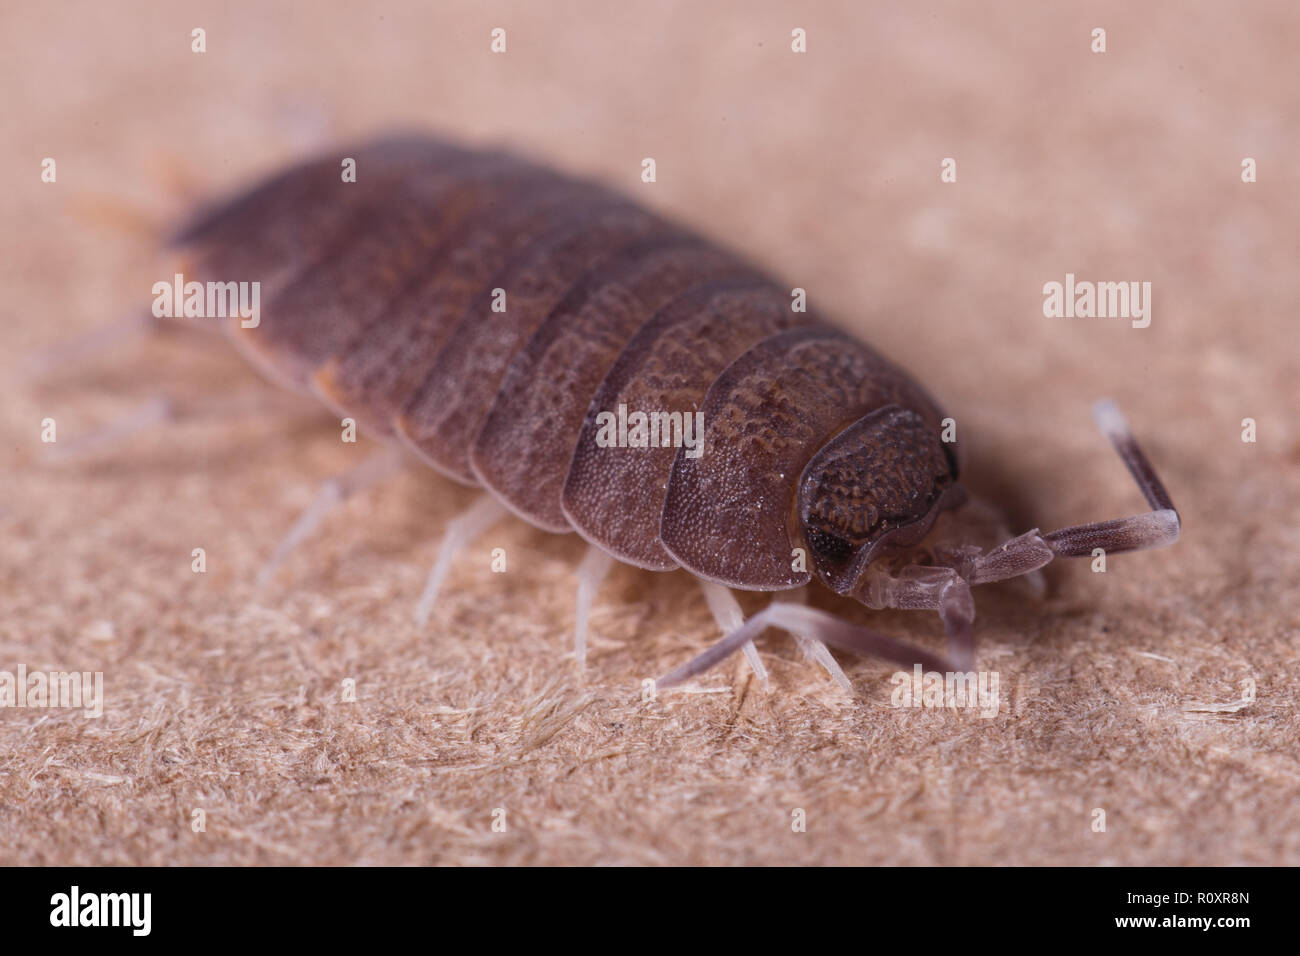 Woodlouse with big antennas crawling on the board. Stock Photo